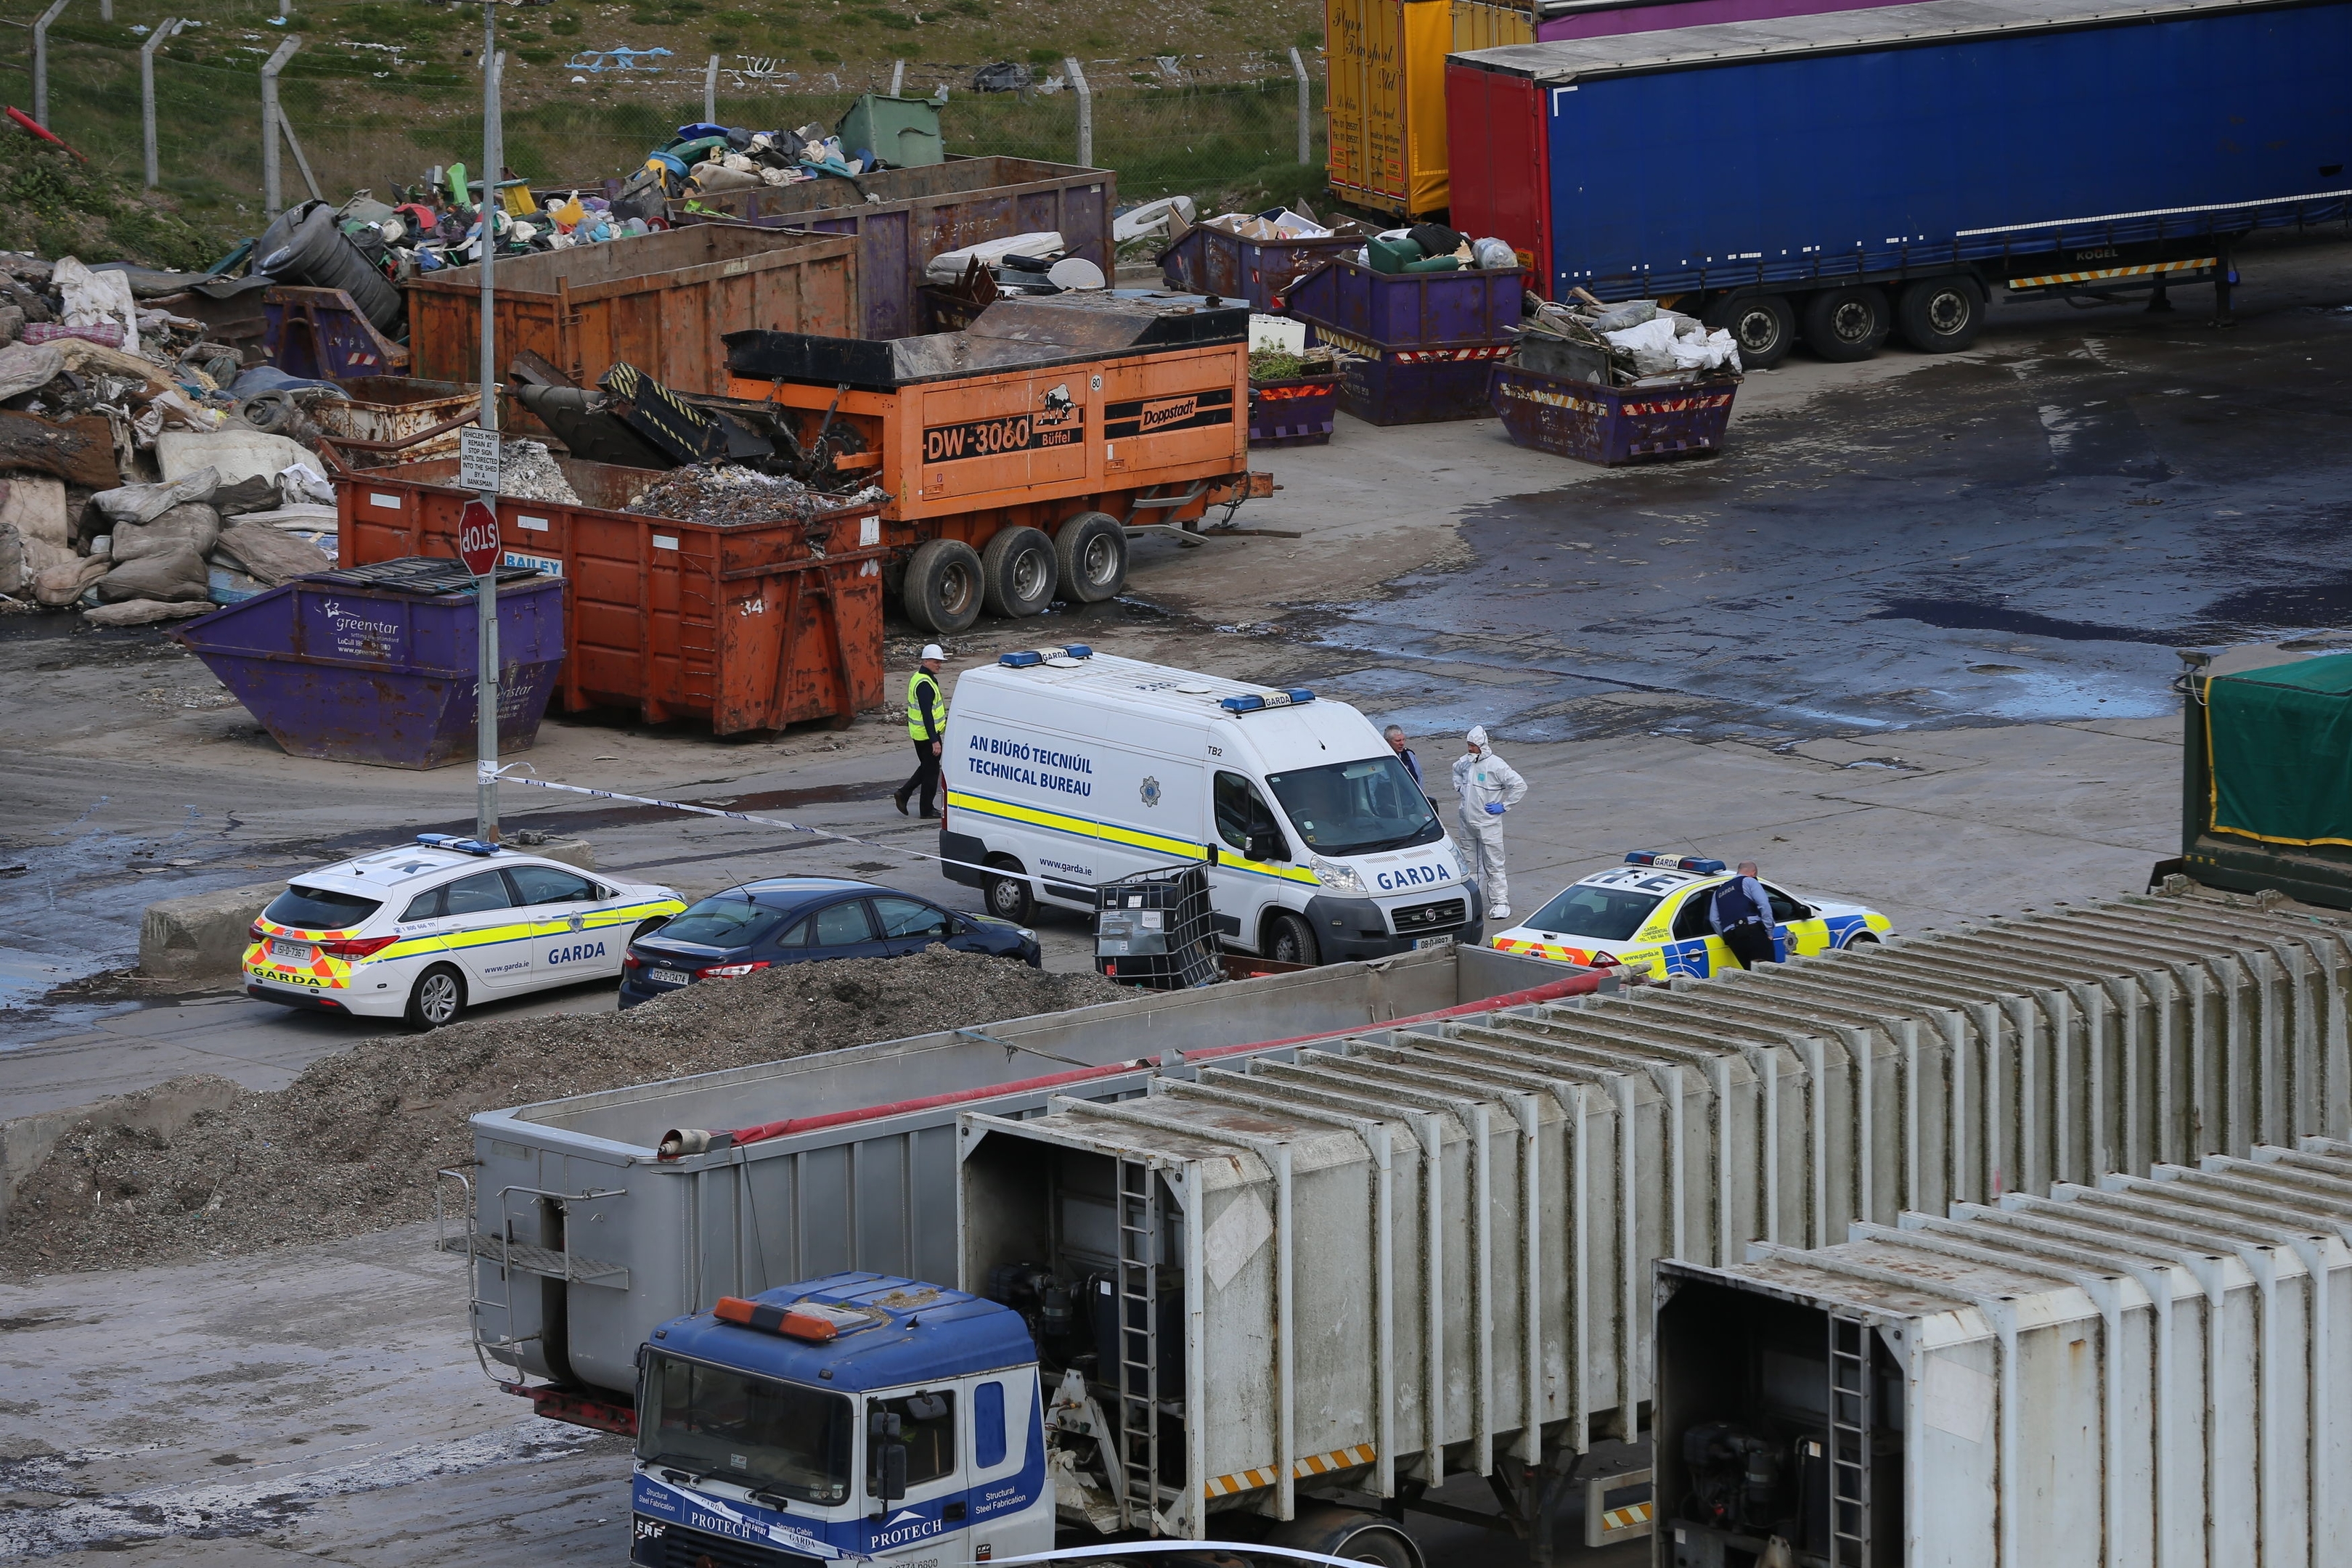 Forensic officers at the recycling facility in Bray, County Wicklow, Ireland, where suspected remains of a newborn baby have been discovered.